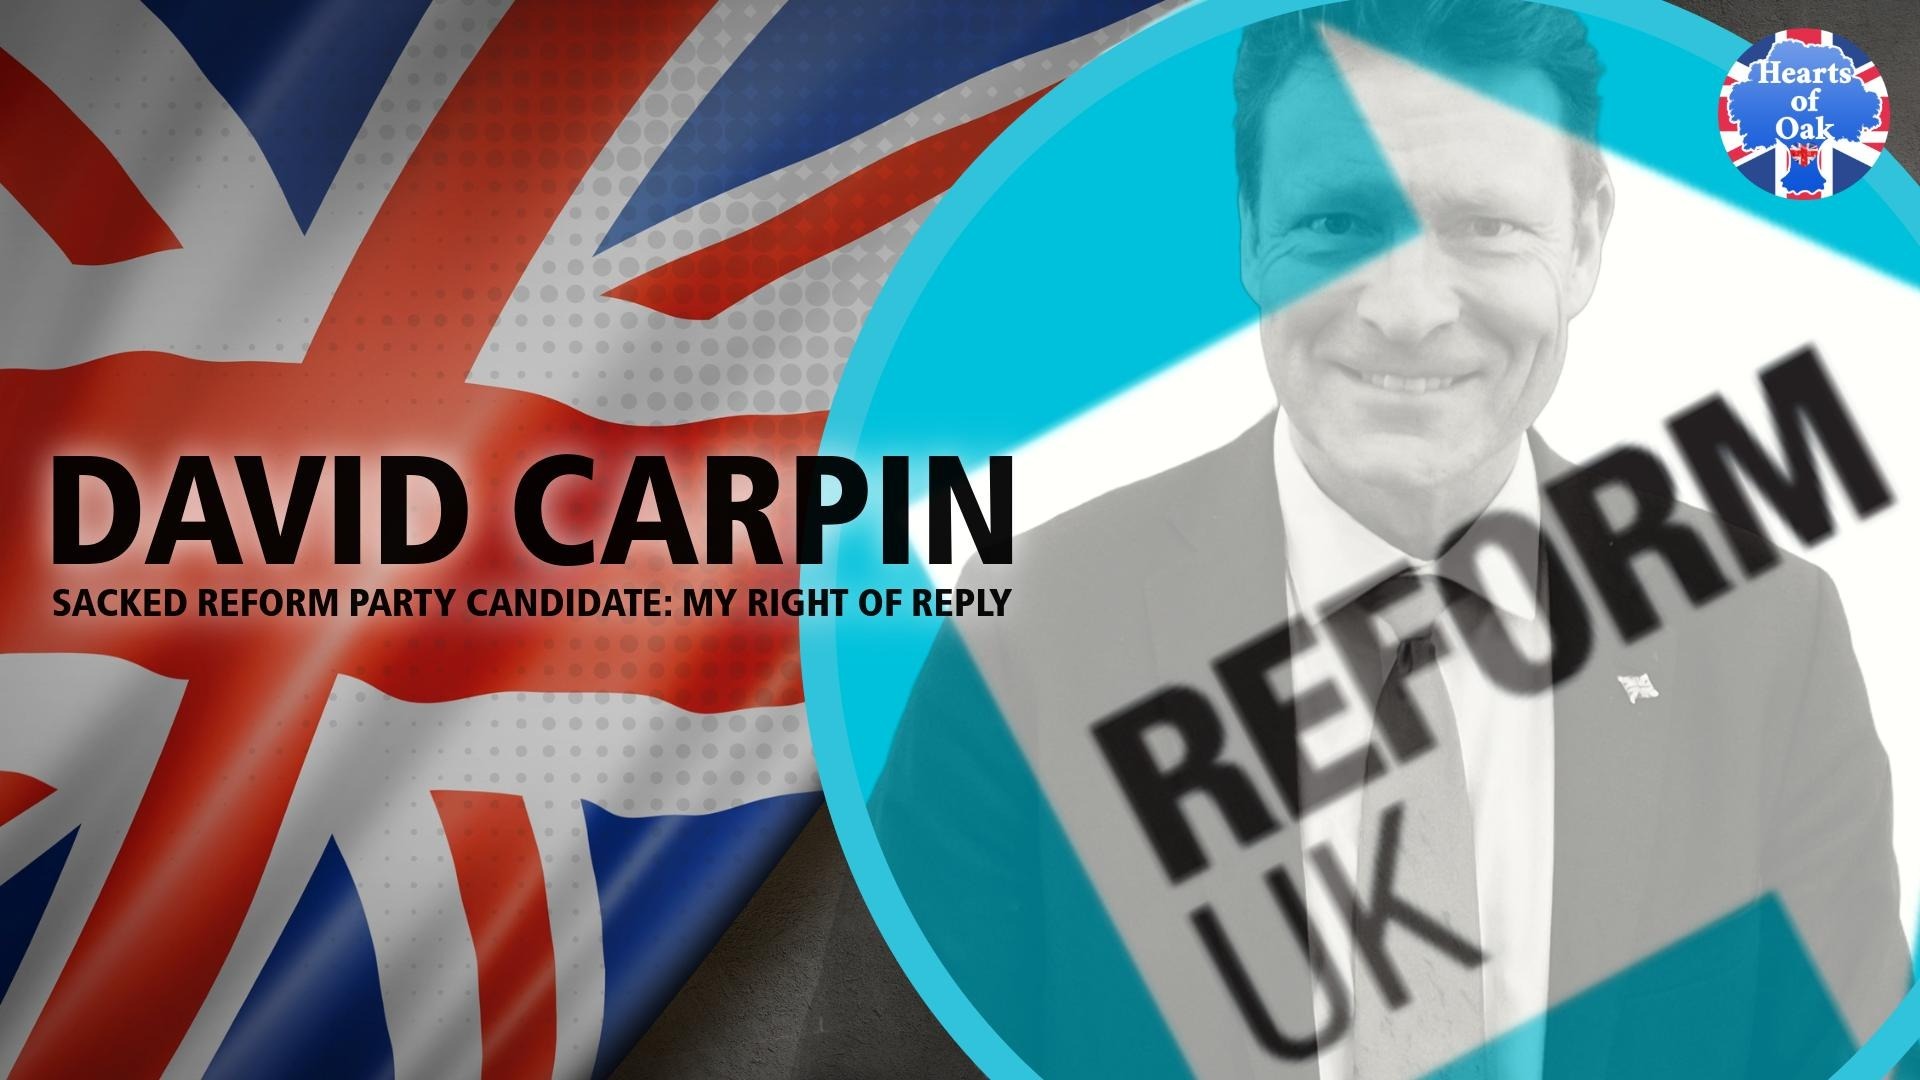 David Carpin - Sacked Reform Party Candidate: My Right of Reply